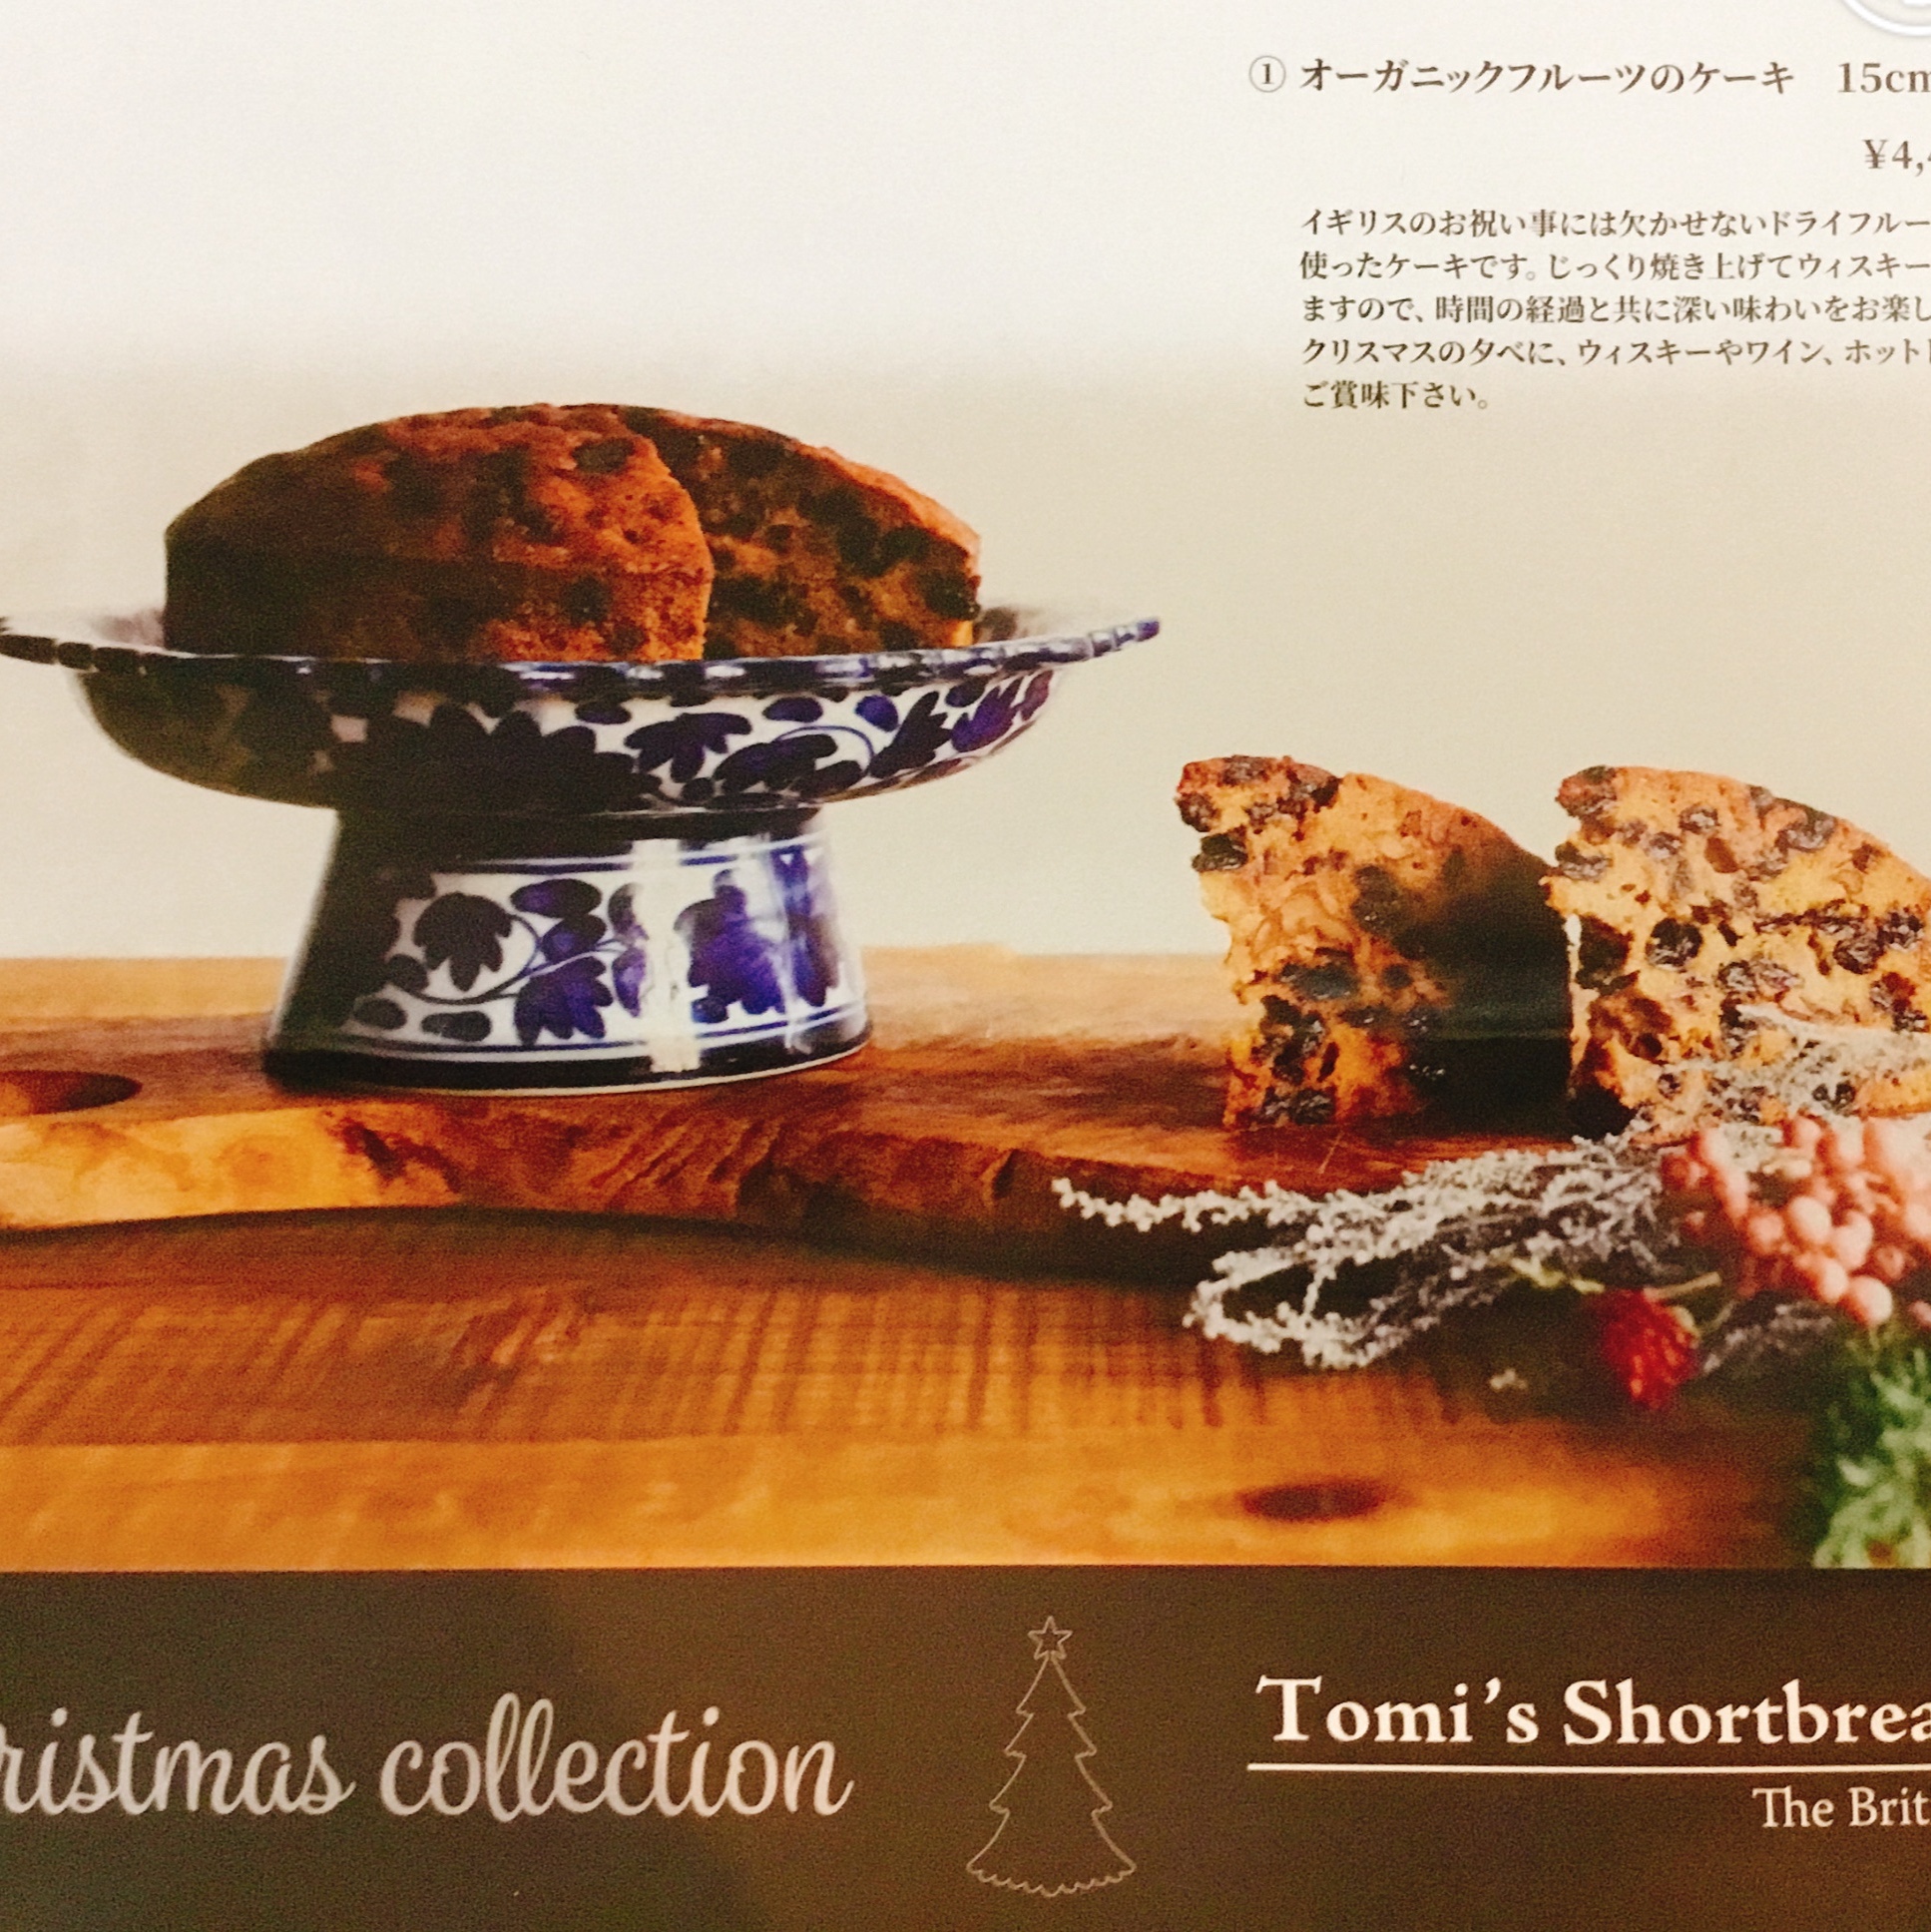 The British PastryShop「トミーズショートブレッドハウス」のChristmas collection